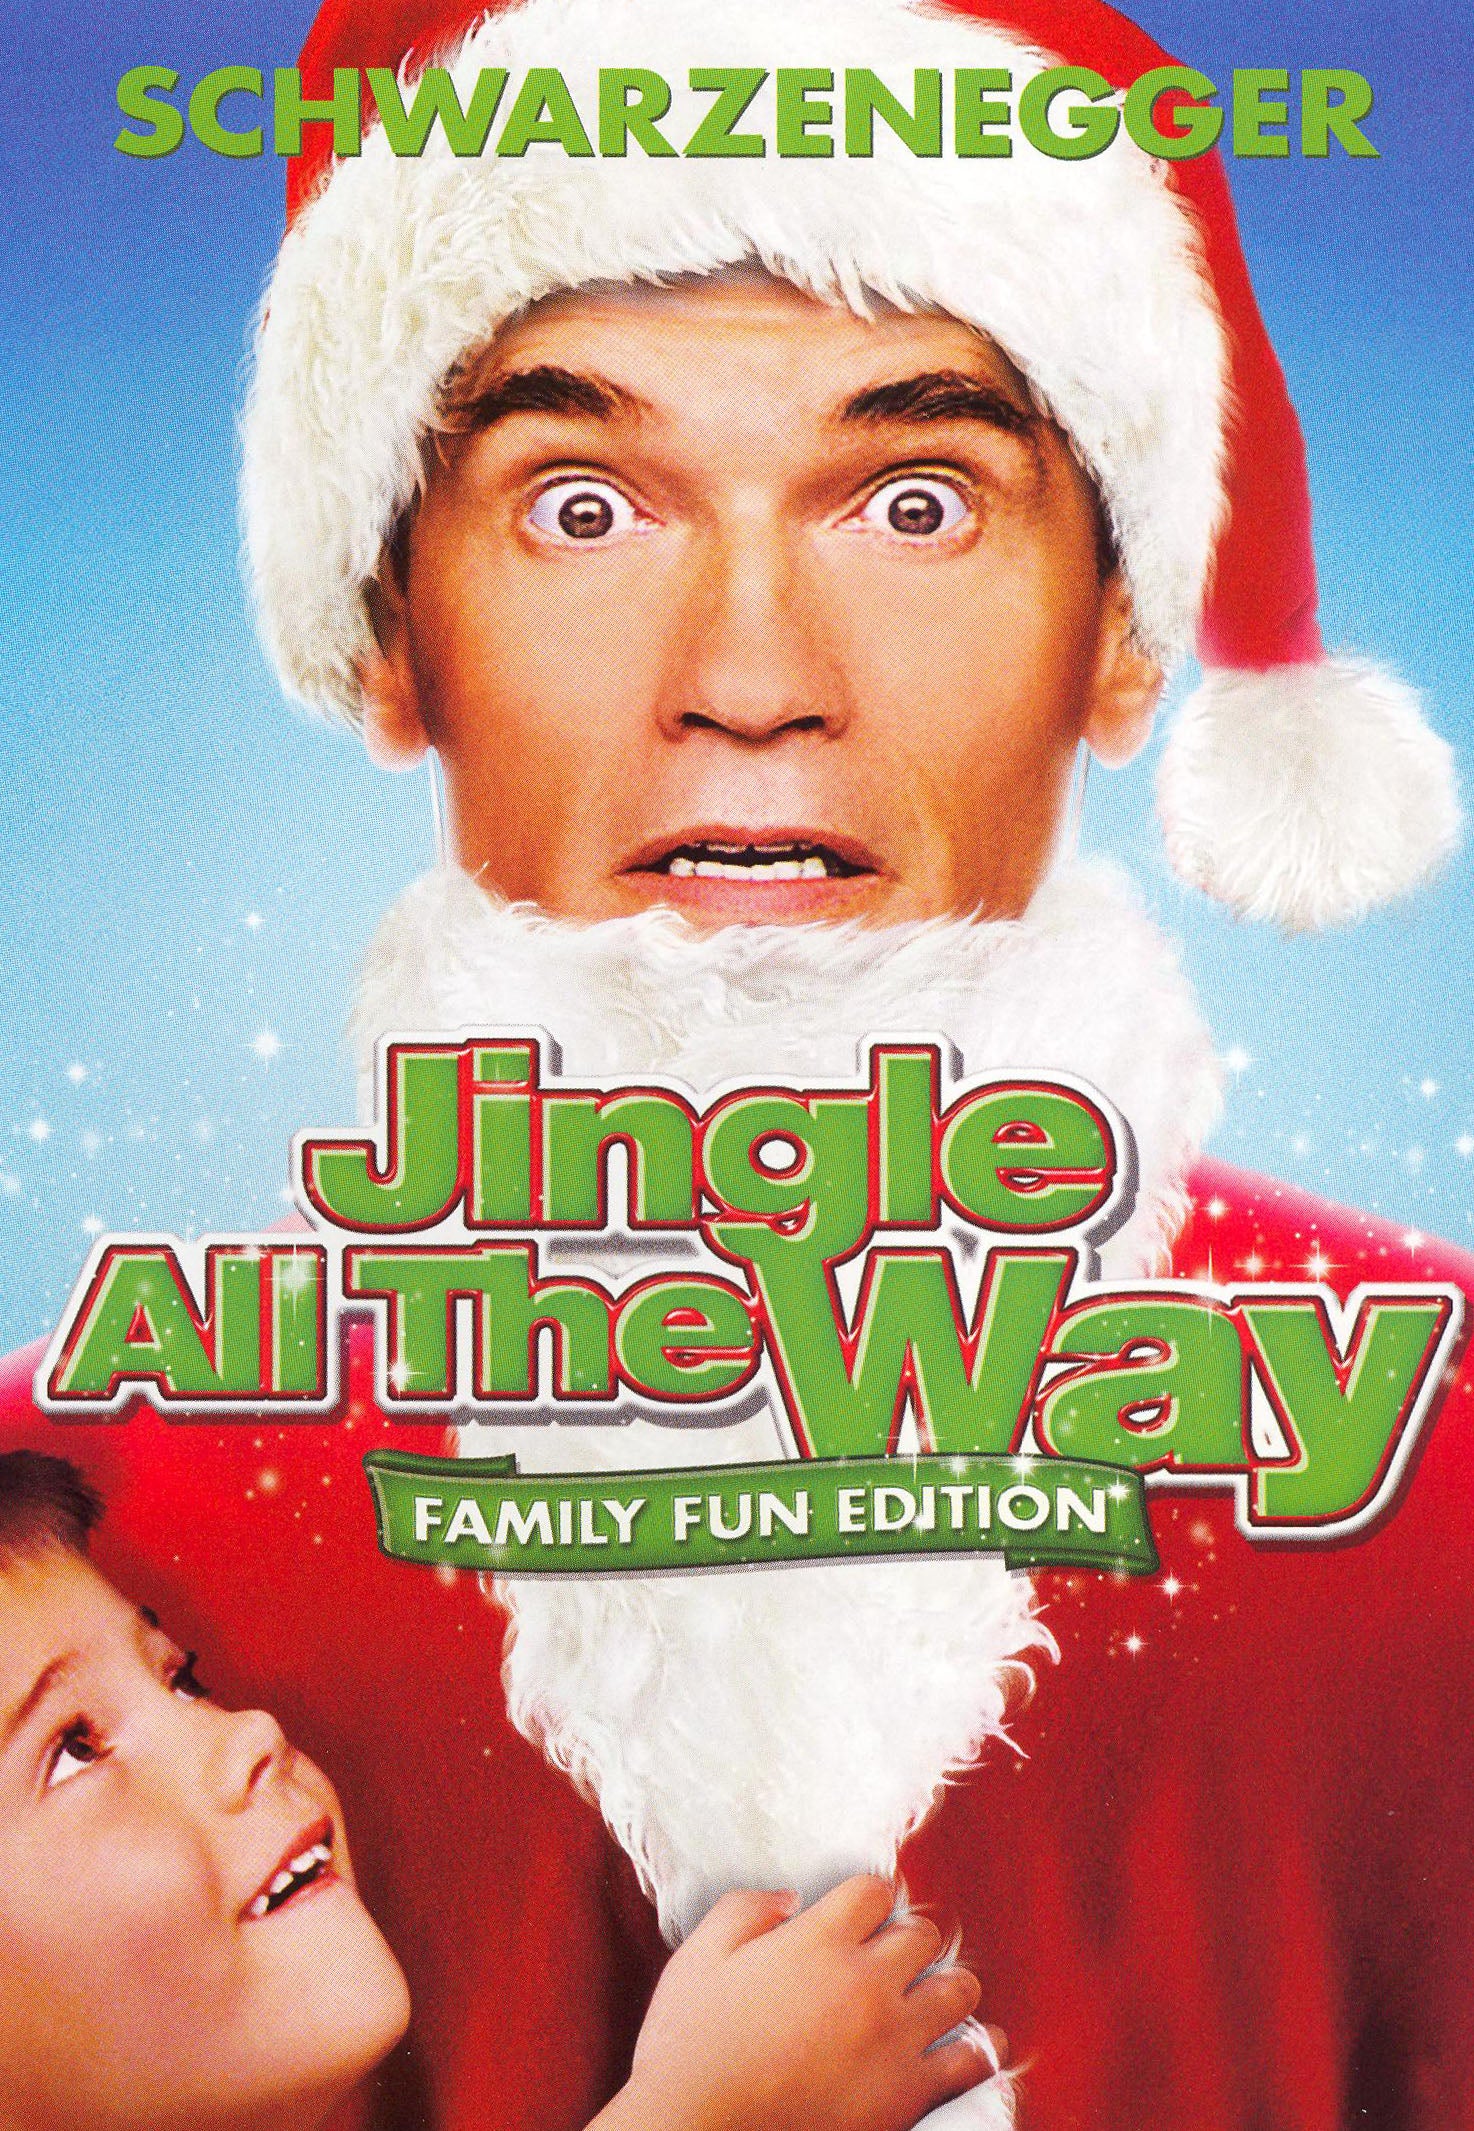 Jingle All the Way [Family Fun Edition] cover art